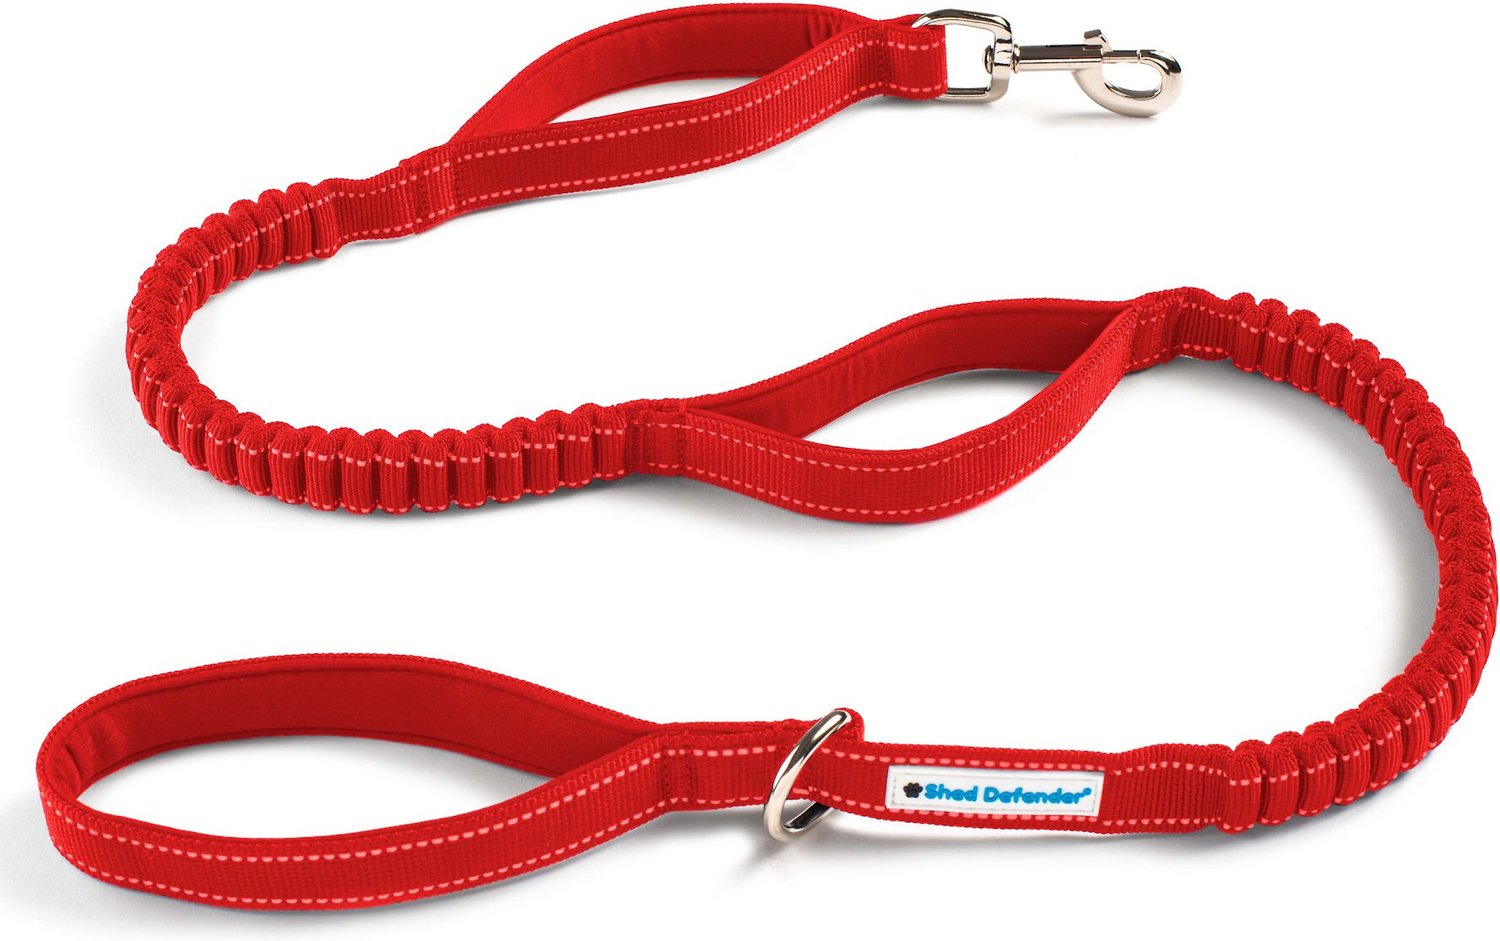 Shed Defender Shock Absorbing Bungee Leash - Three Padded Traffic Handles, Stretches from 4-7 ft.